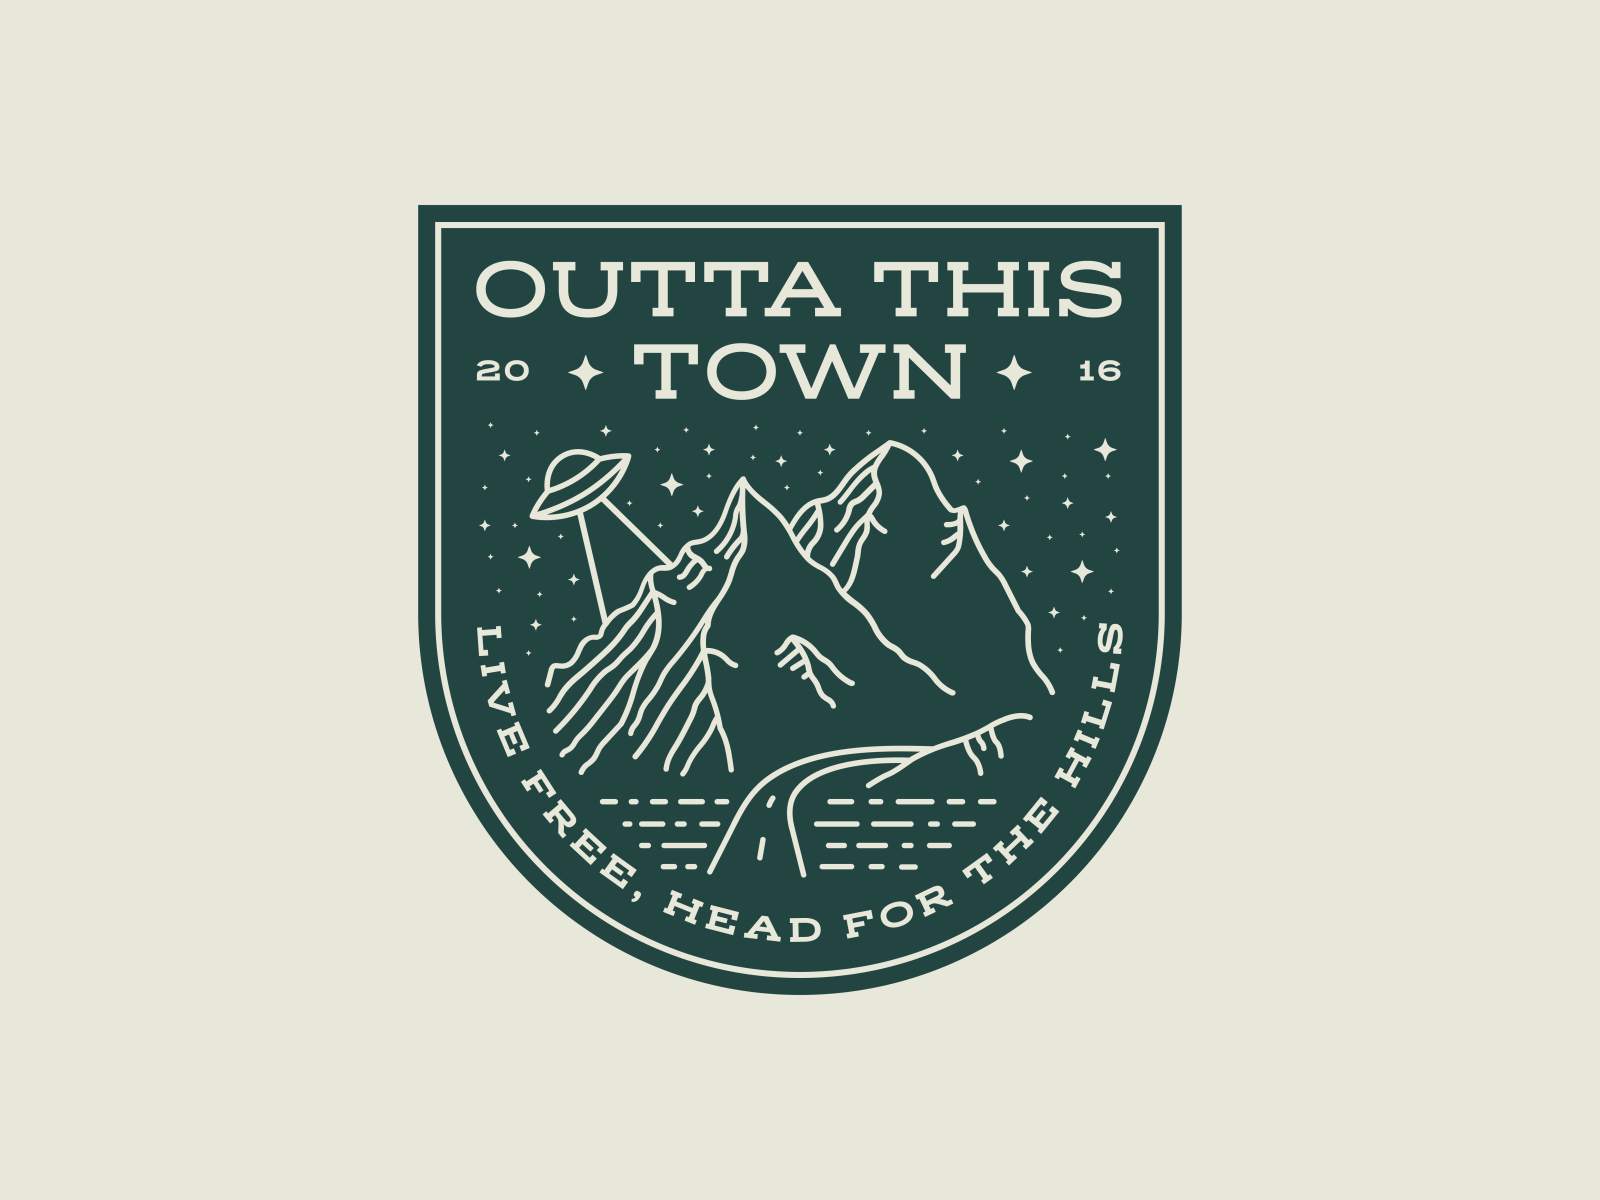 Outta This Town Live Free Badge ⛰️ ✨ alien aliens badge landscape lockup mountains nature nature badge nature illustration road seal space sparkle stars ufo vintage badge vintage badges vintage design wilderness